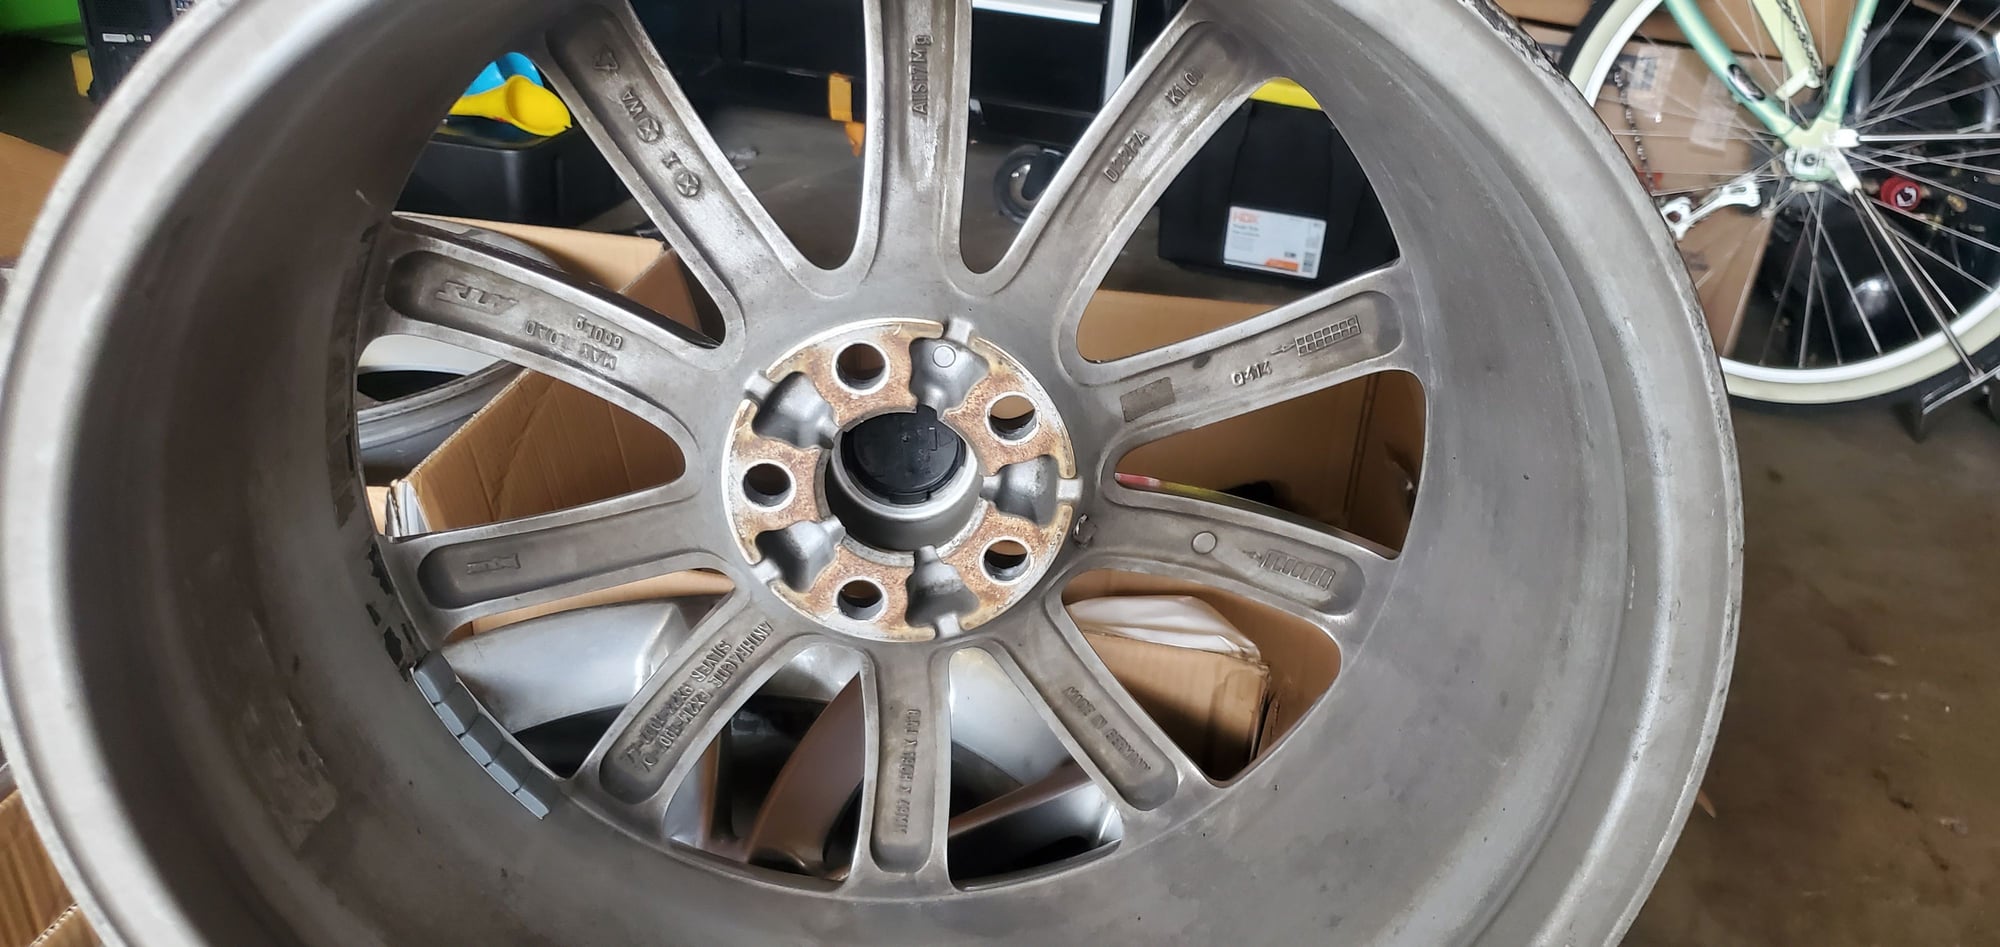 Wheels and Tires/Axles - 19 inch XF 2016 Rims for Sale. 400!! - Used - All Years Any Make All Models - Phillips Ranch, CA 91766, United States